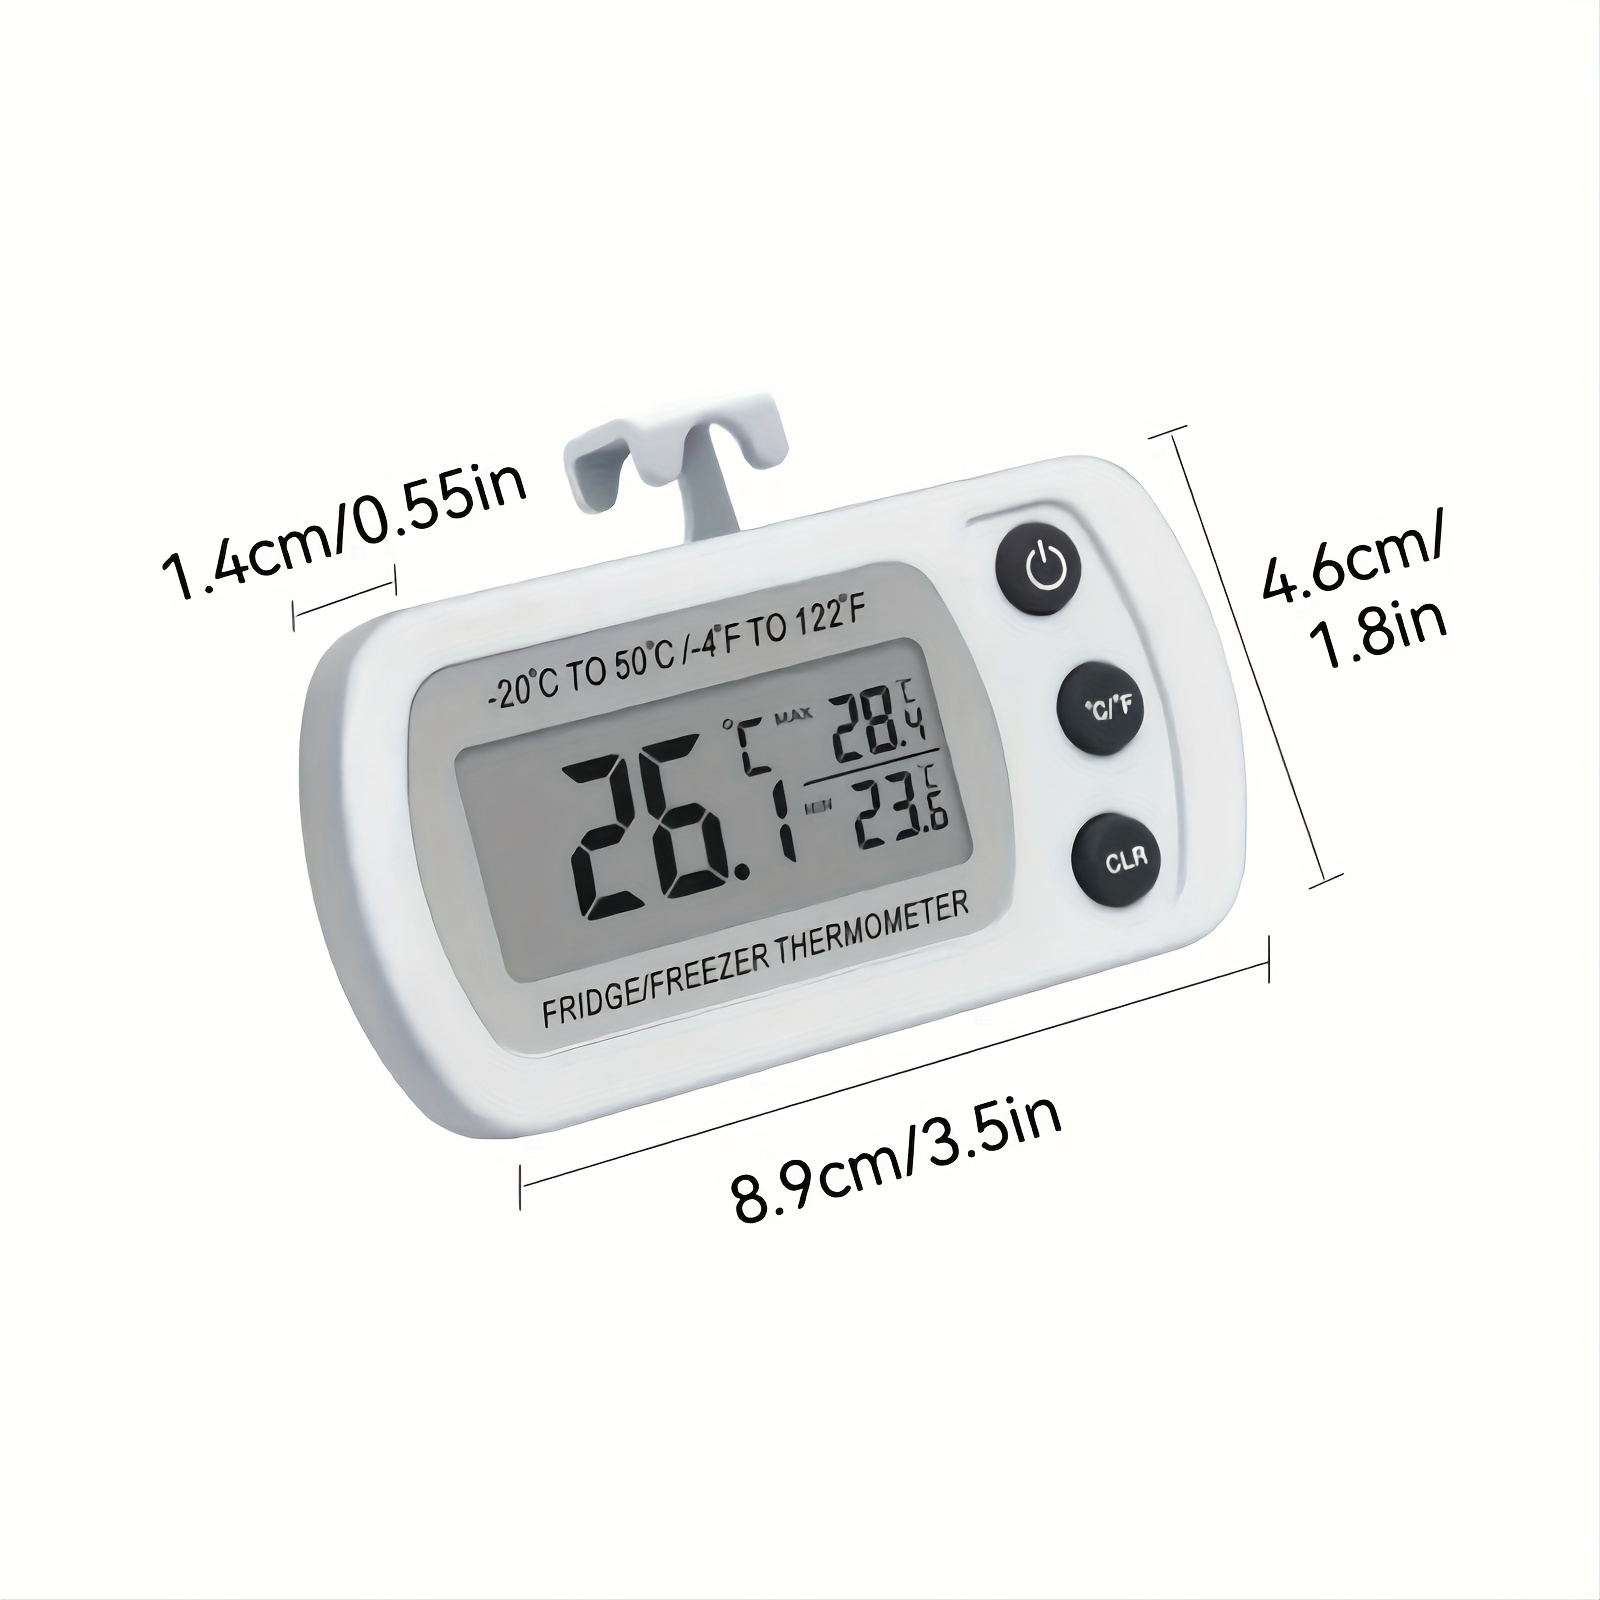 Waterproof Refrigerator Fridge Thermometer Digital Freezer Room Thermometer Max/Min Record Function Large LCD Screen and Magnetic Back for Kitchen